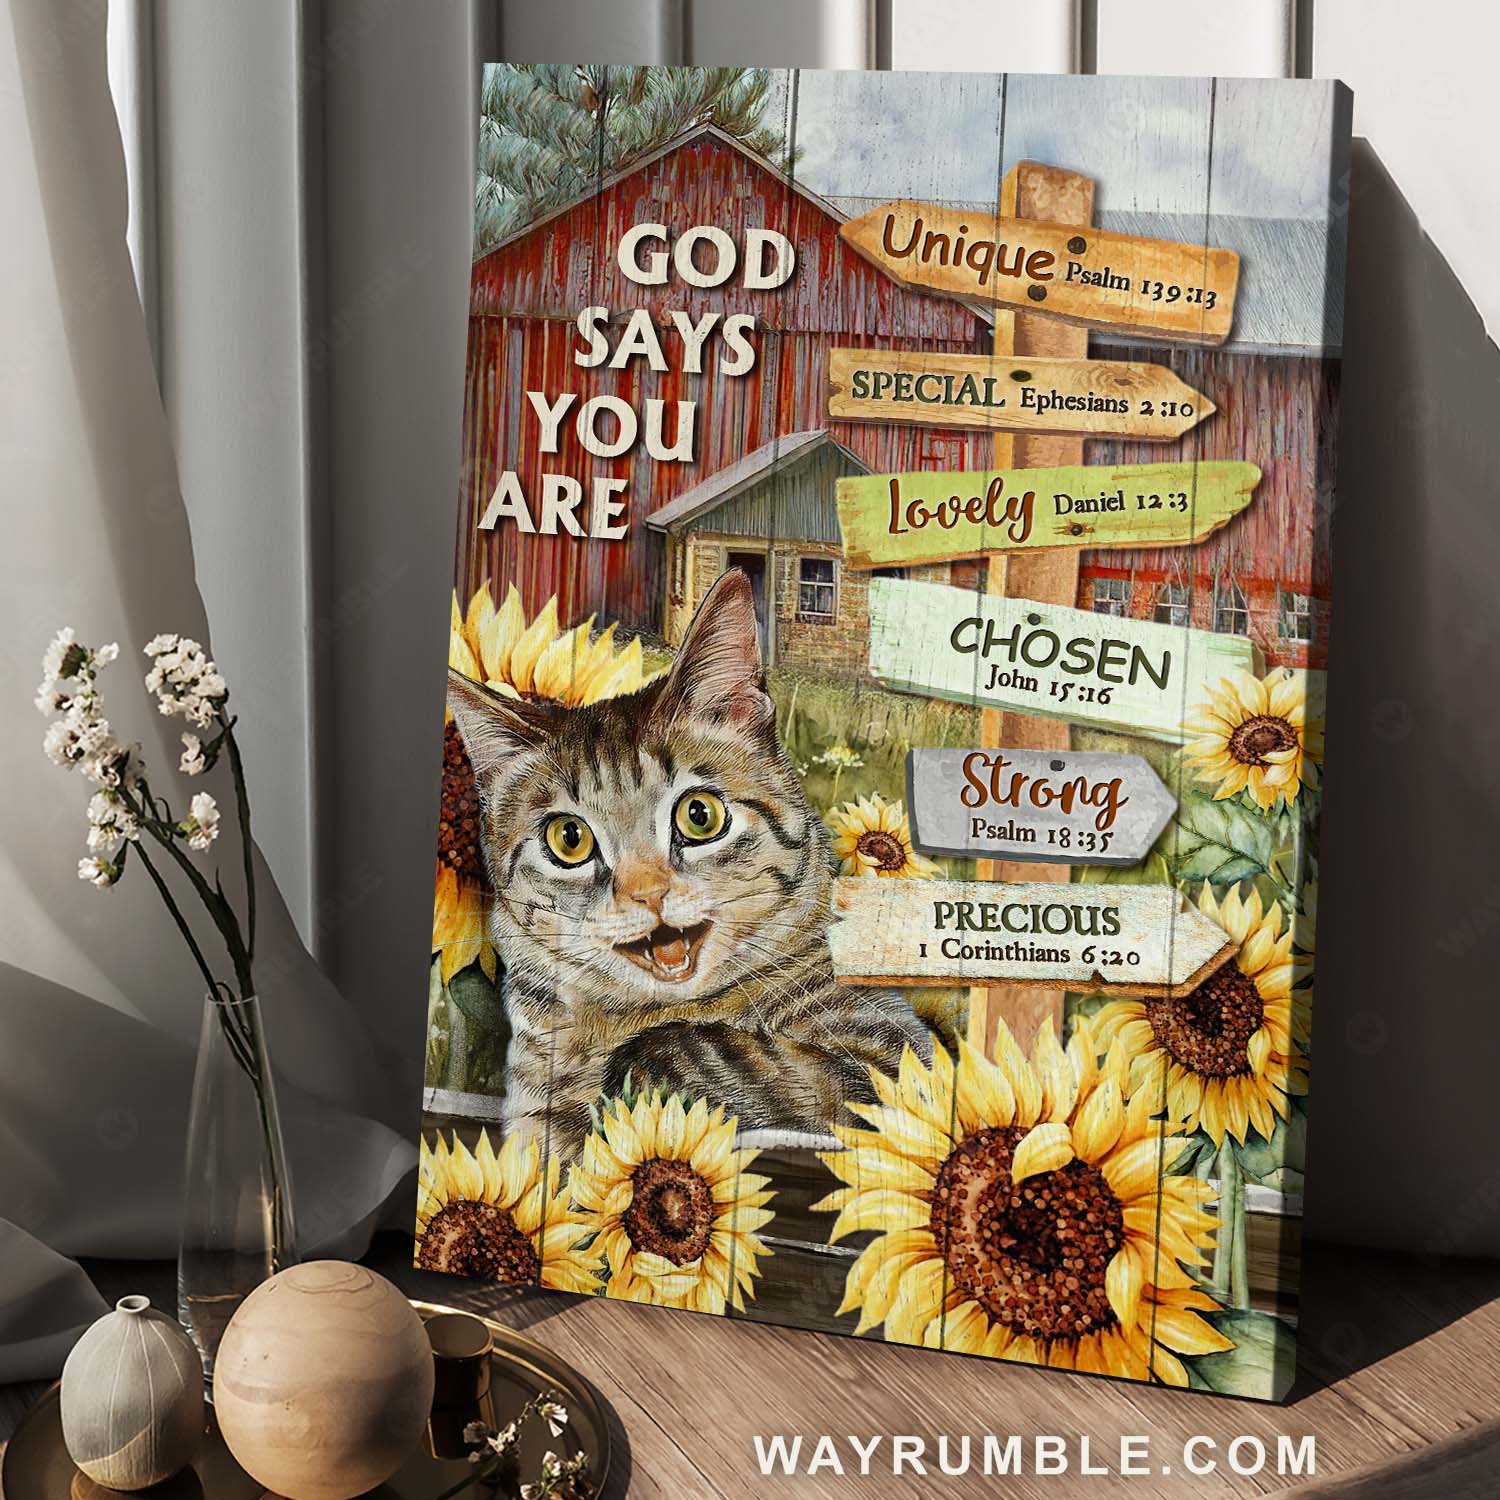 God says you are Canvas Collection Tagged bible - Wayrumble